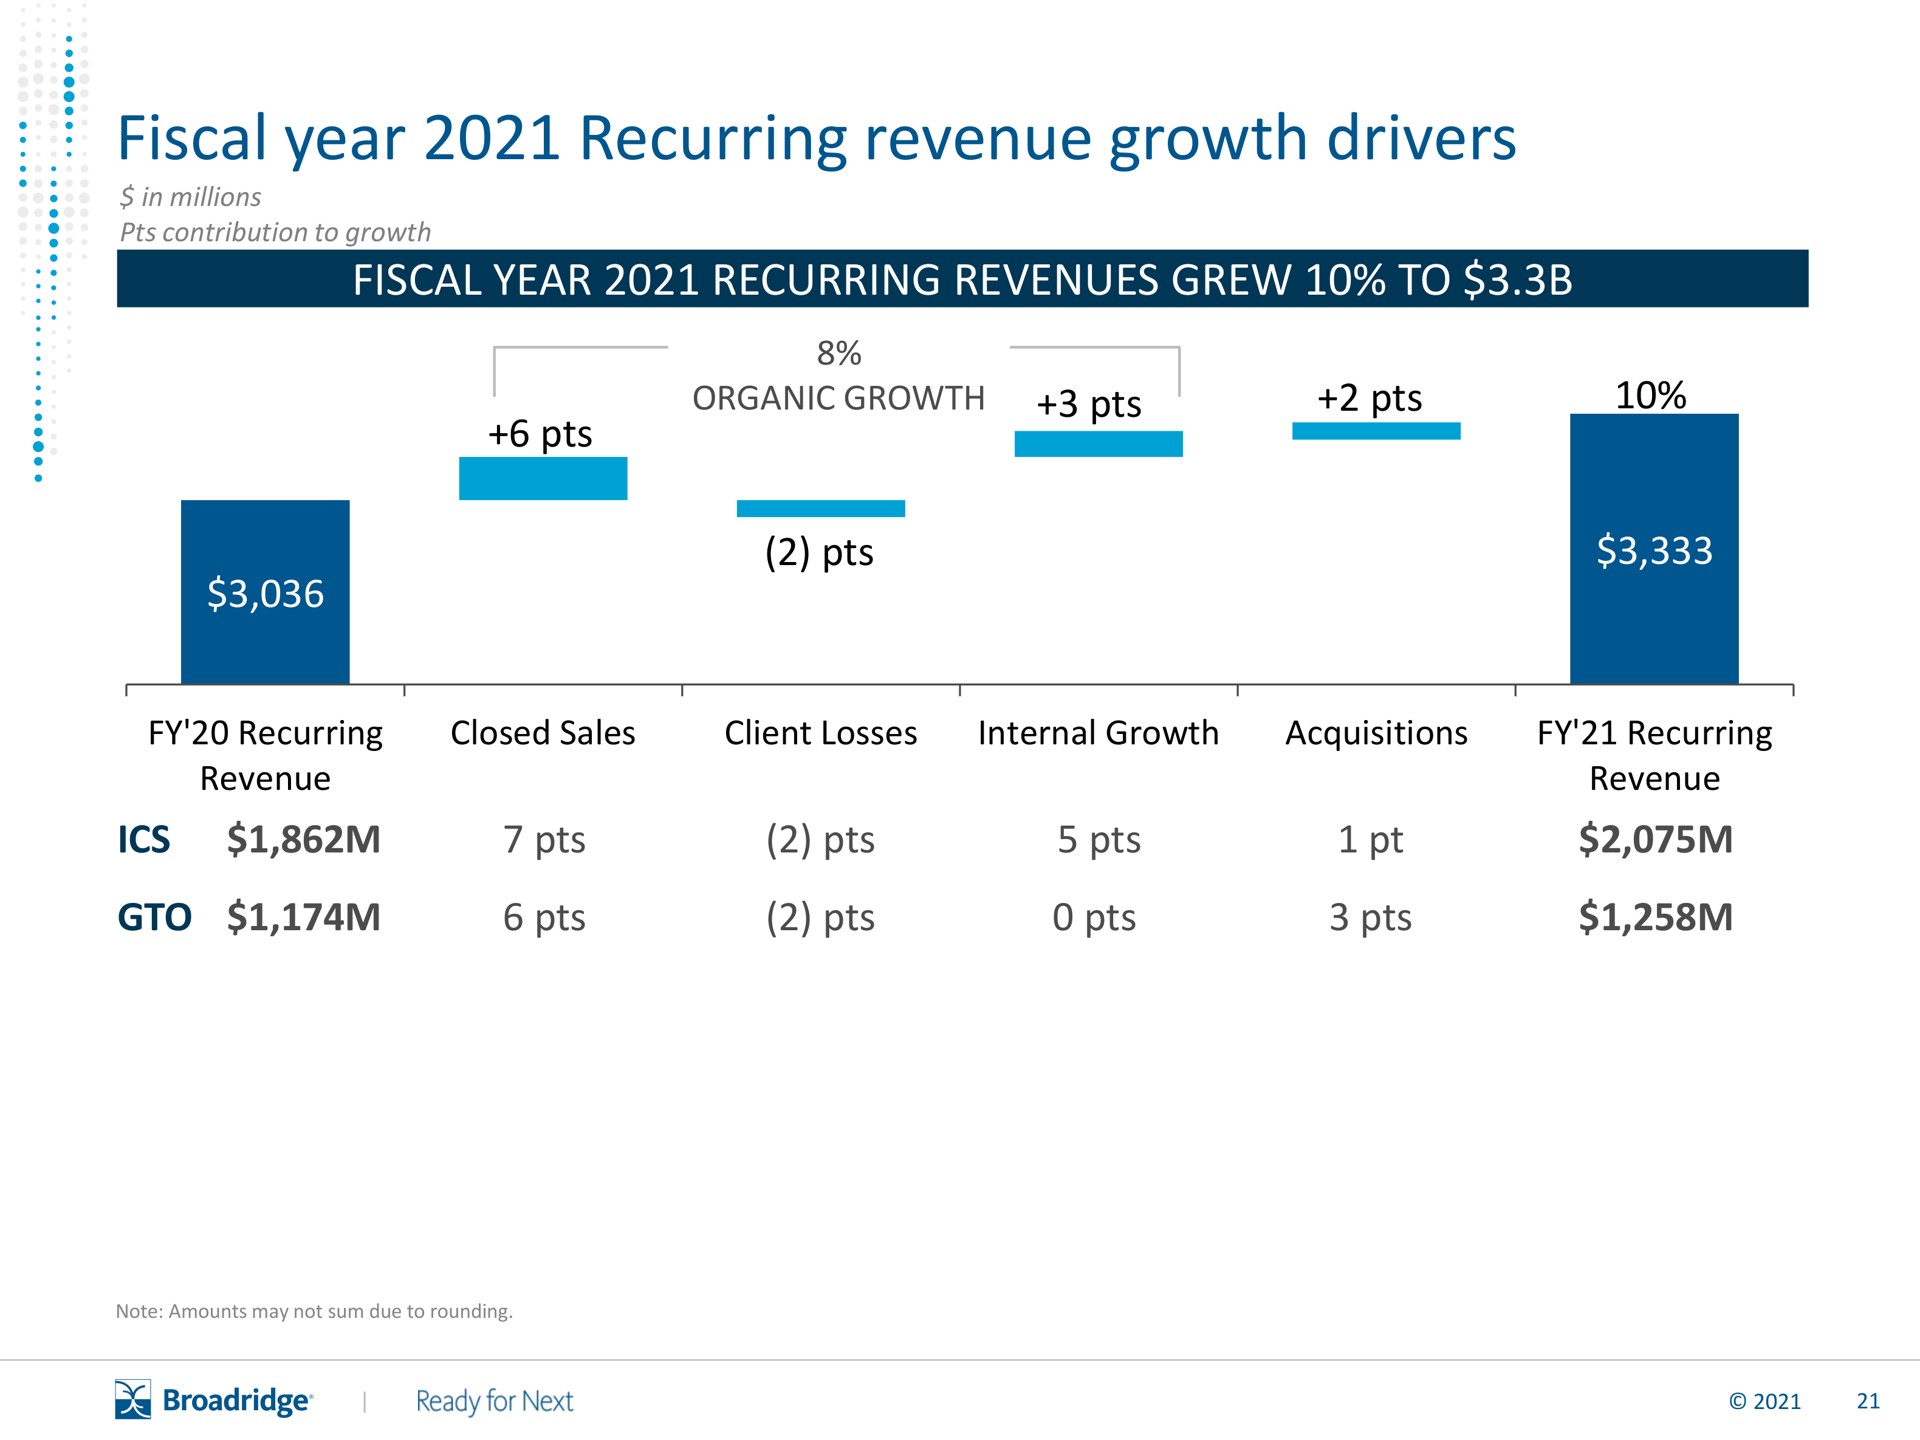 fiscal year recurring revenue growth drivers | Broadridge Financial Solutions